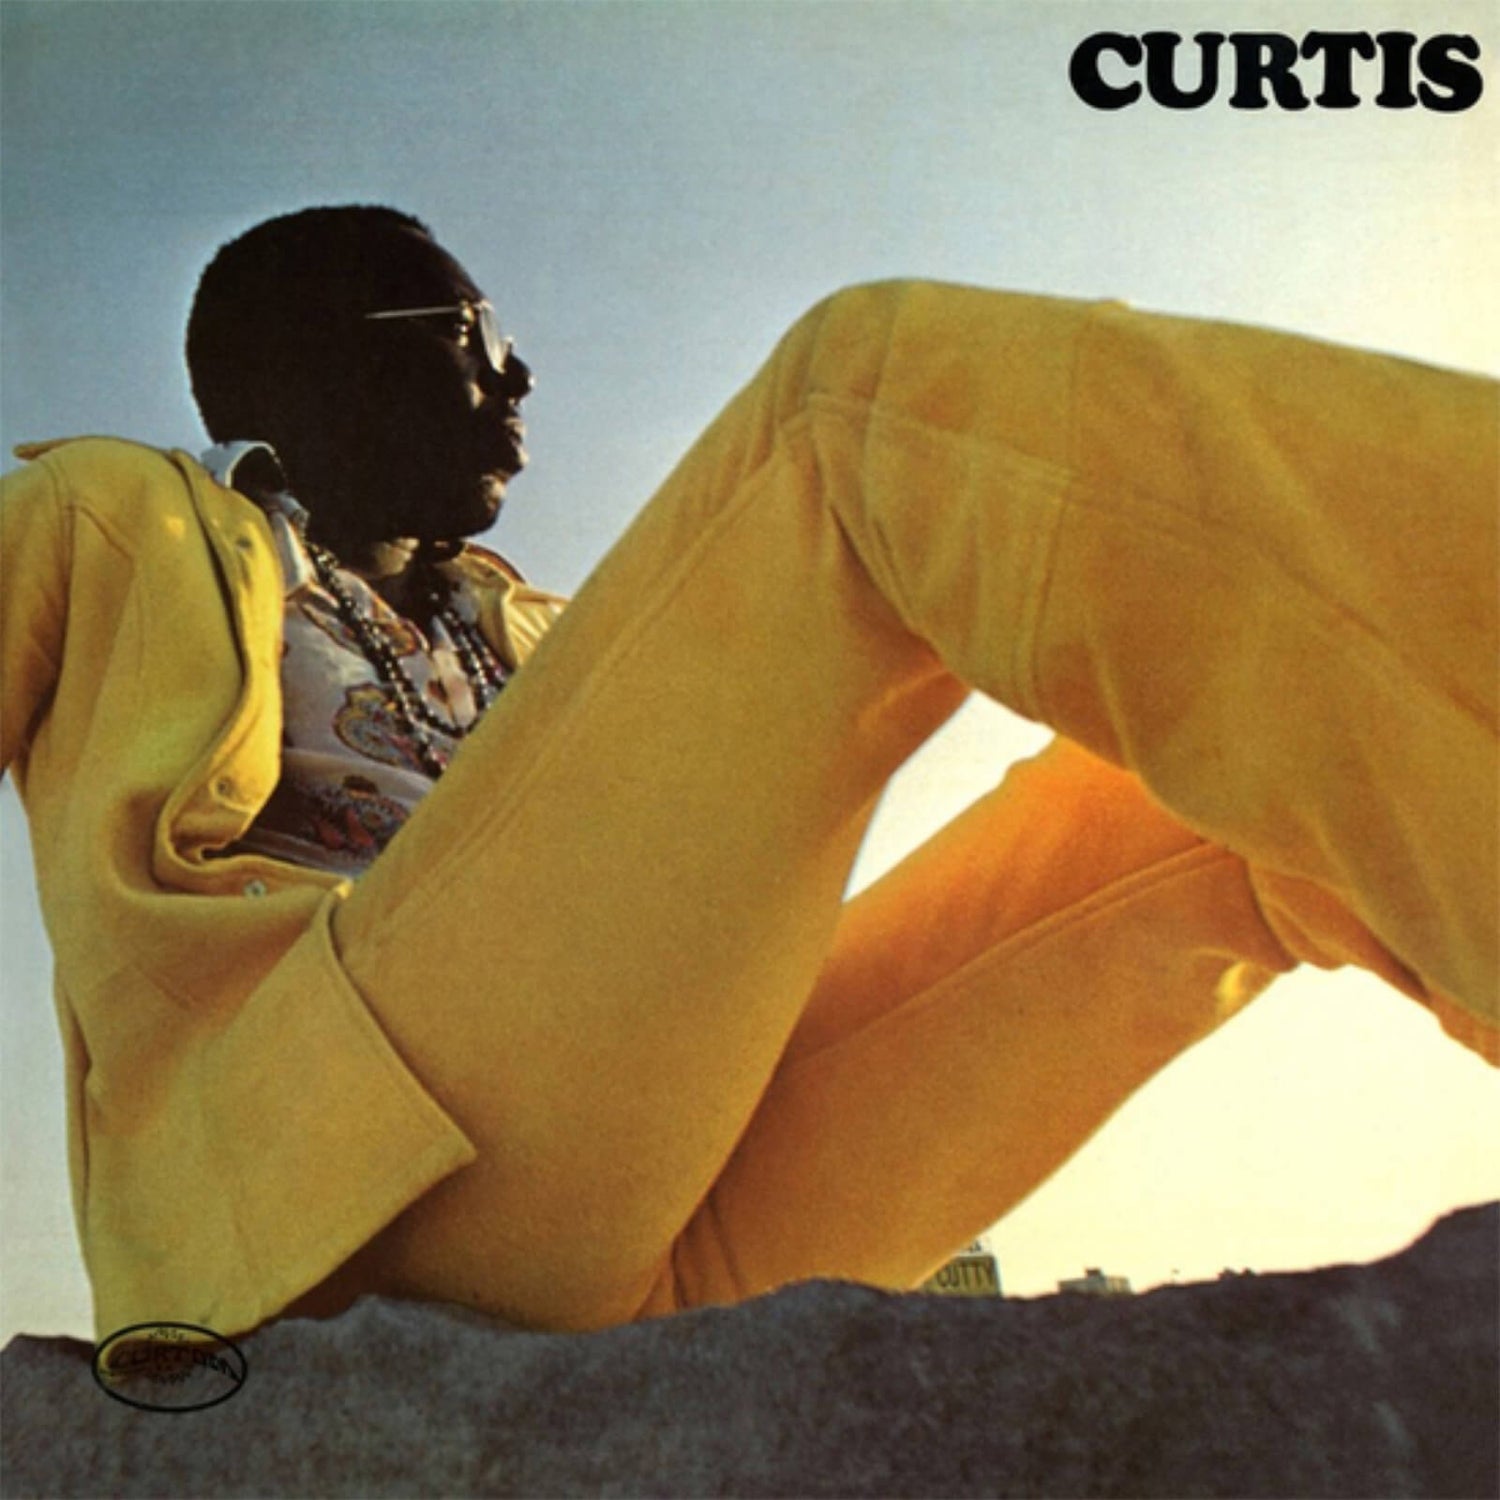 Curtis Mayfield - Curtis 180g Vinyl 2LP: 50th Anniversary Deluxe Edition